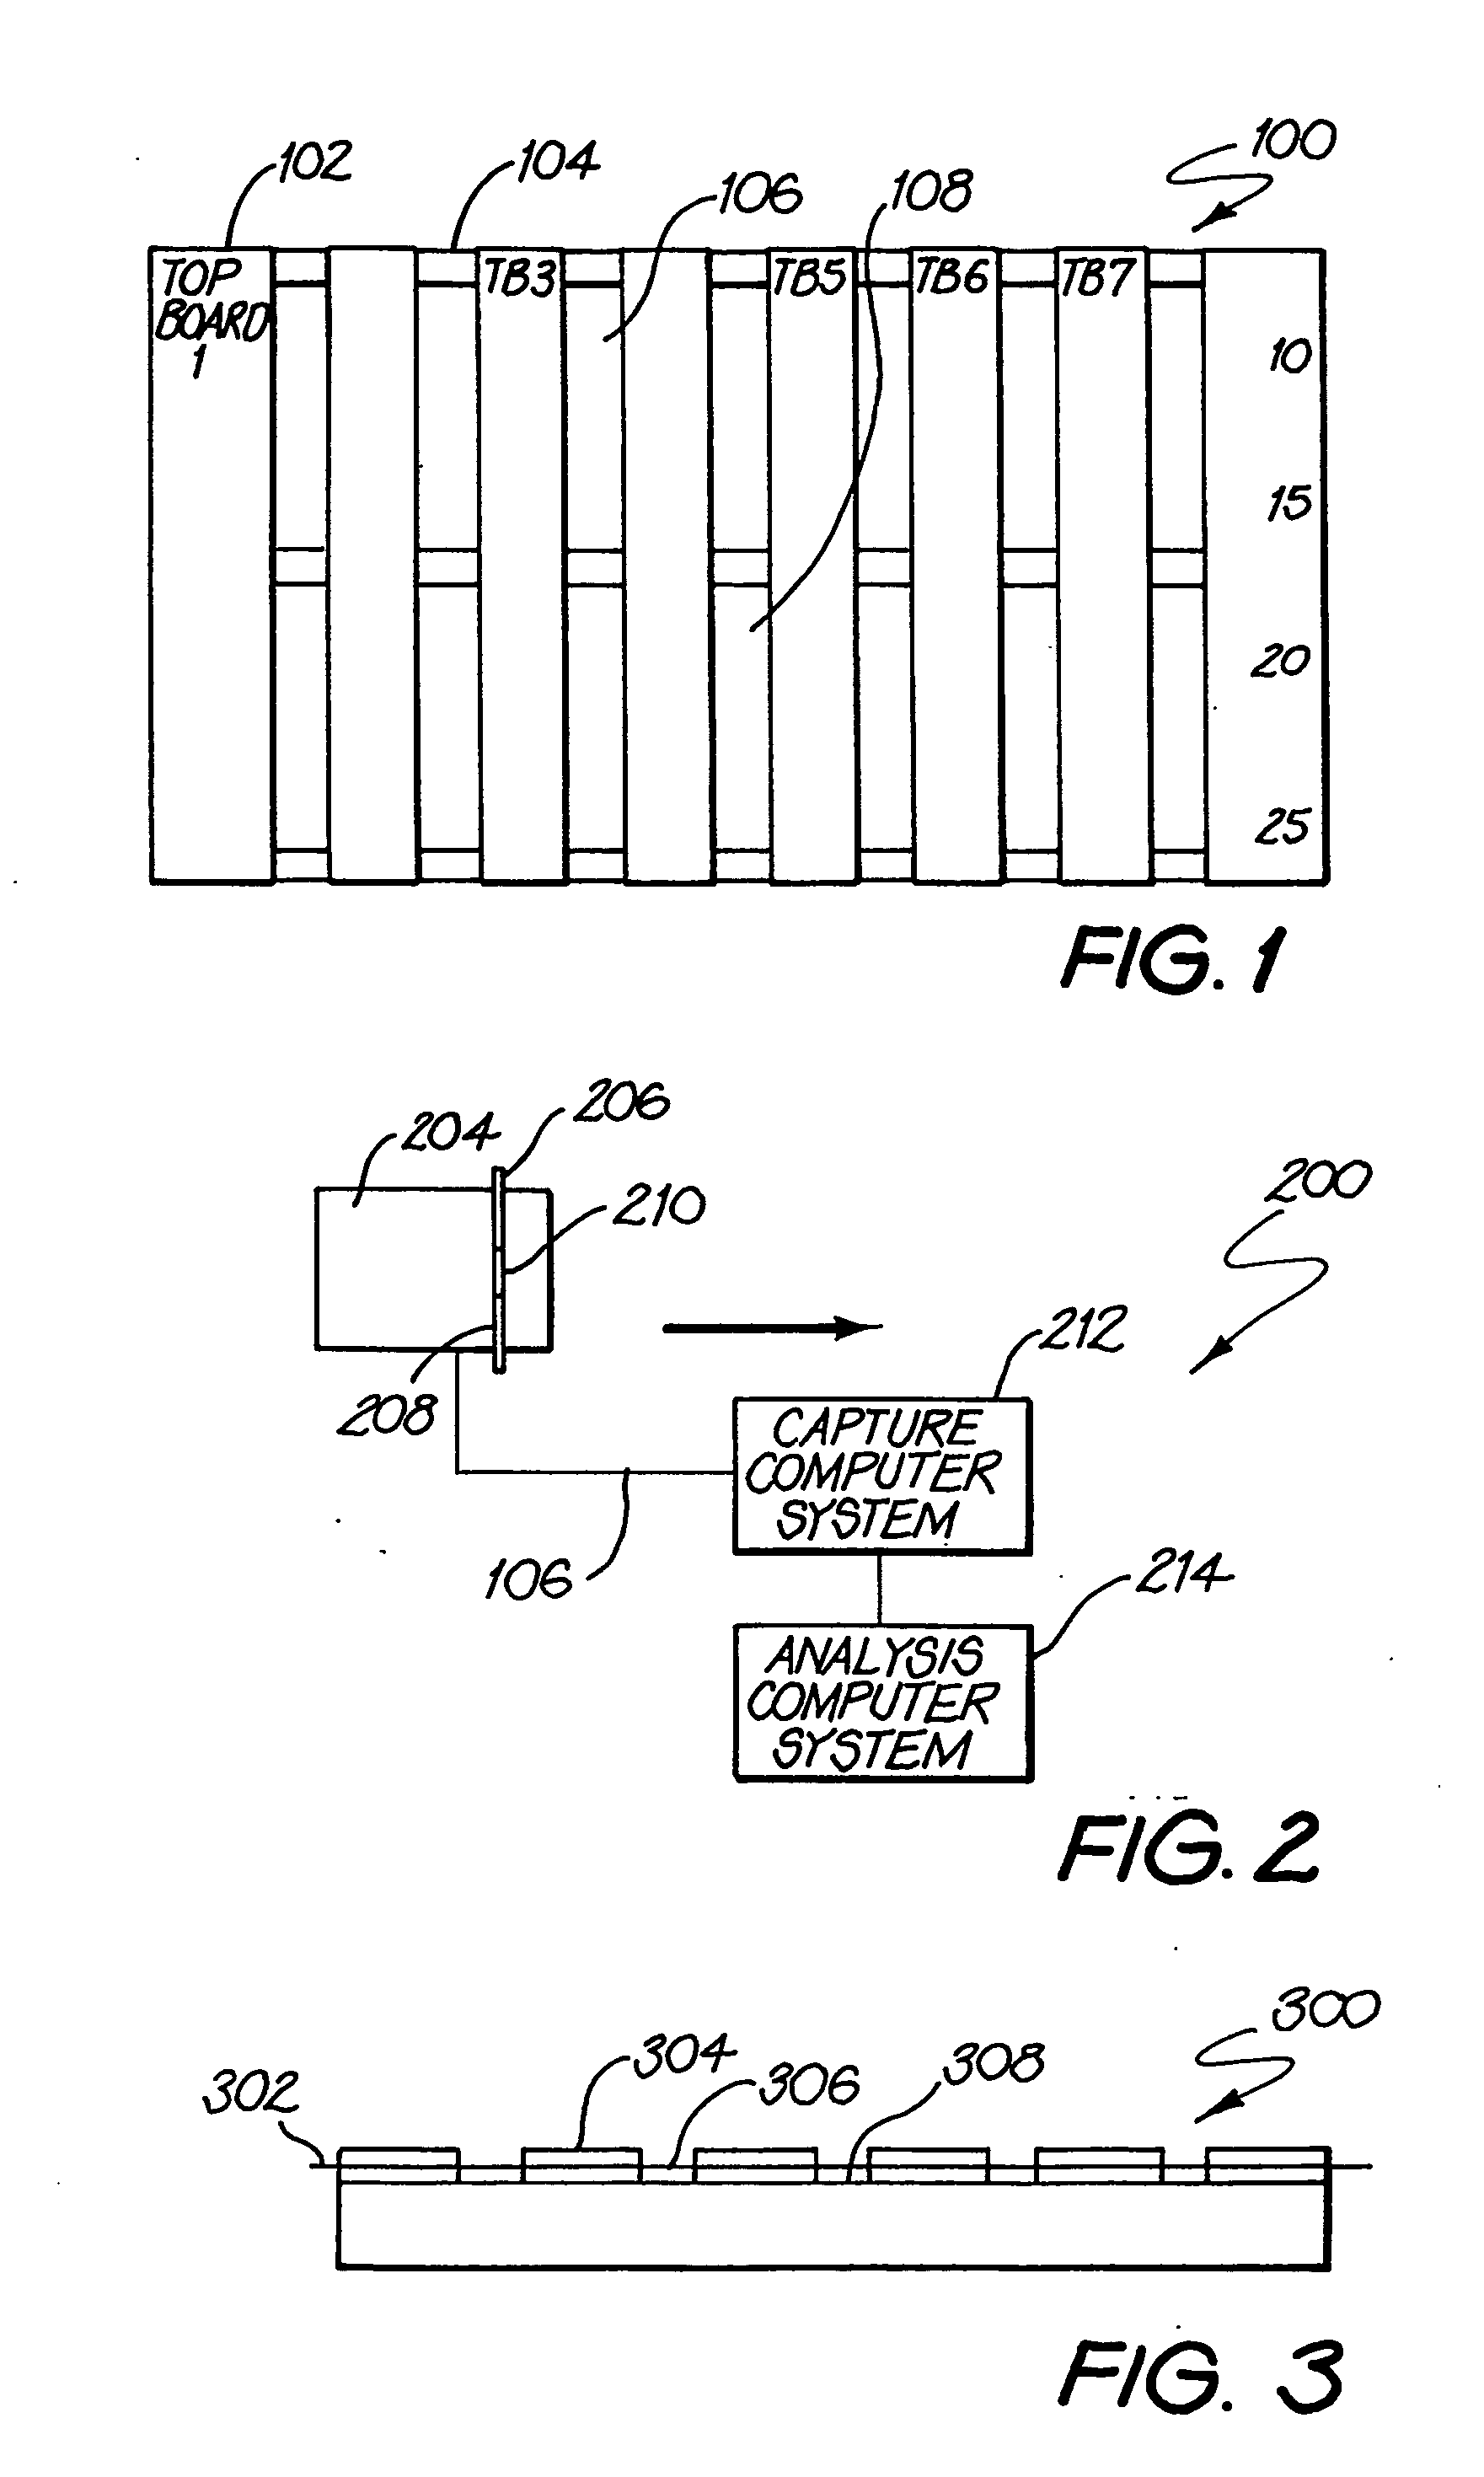 Software and methods for automated pallet inspection and repair